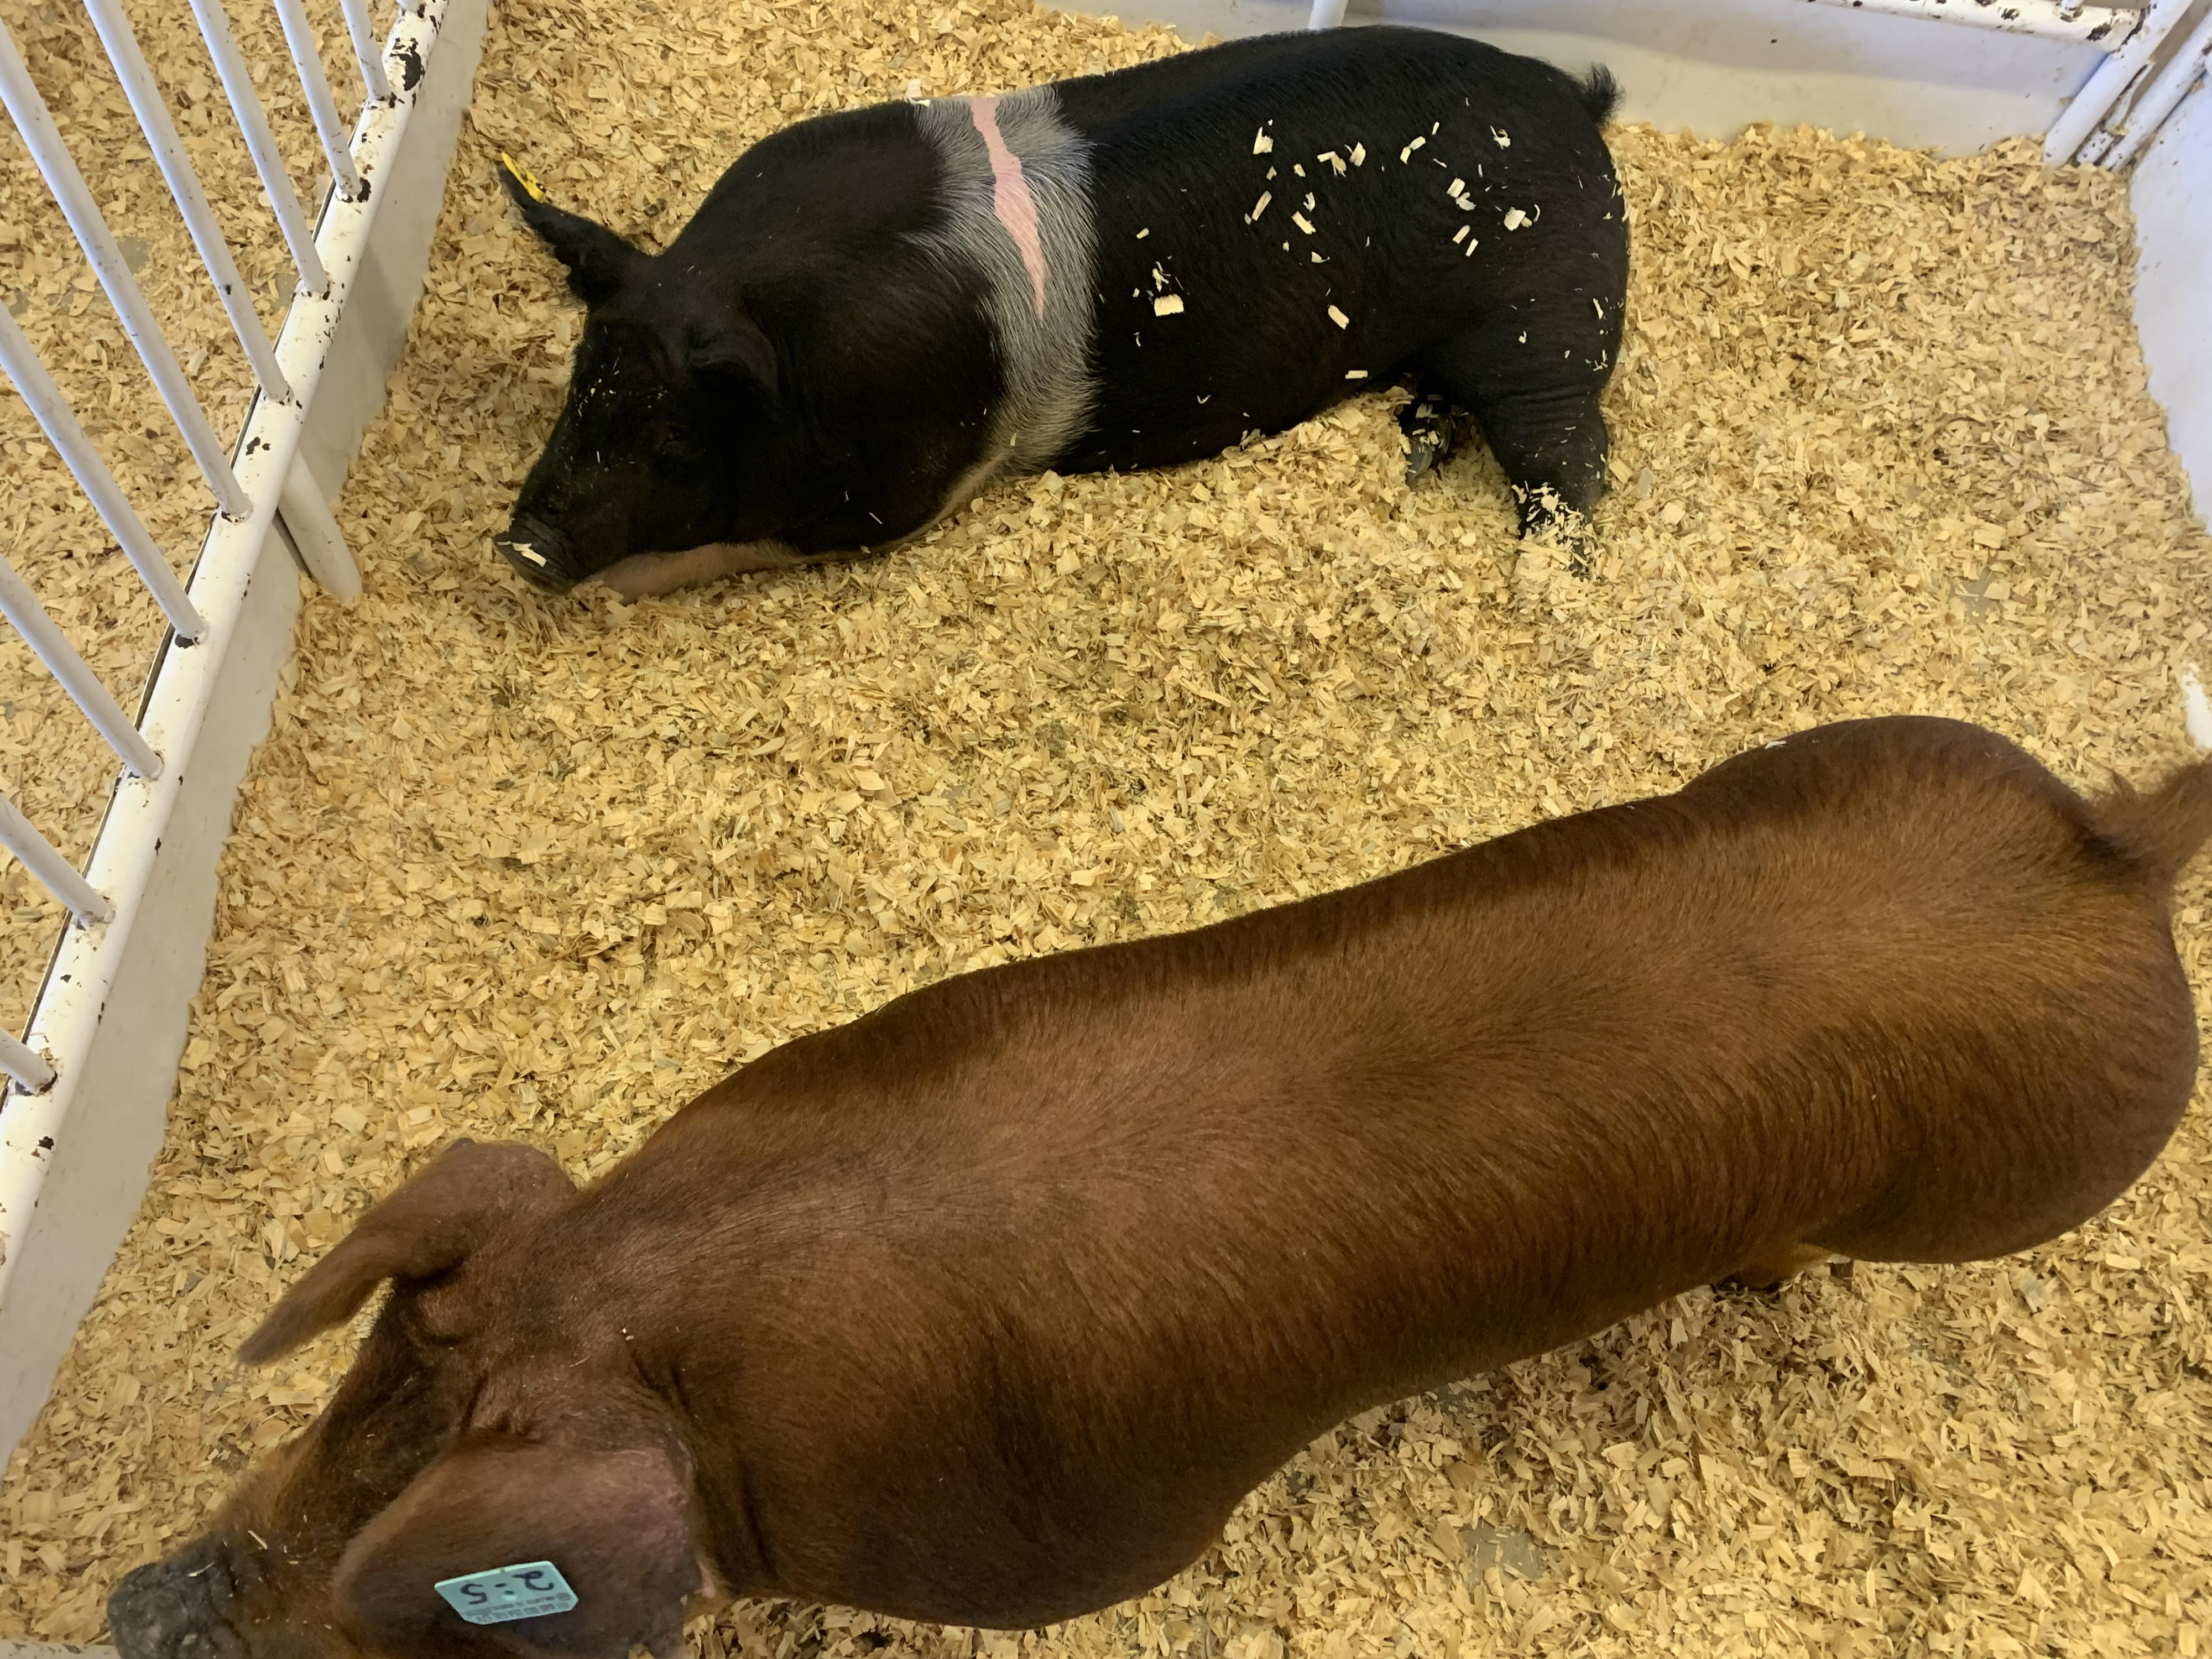 Afternoon Ag News, February 2, 2022: U.S. pork exports to Mexico will set a new record in 2021